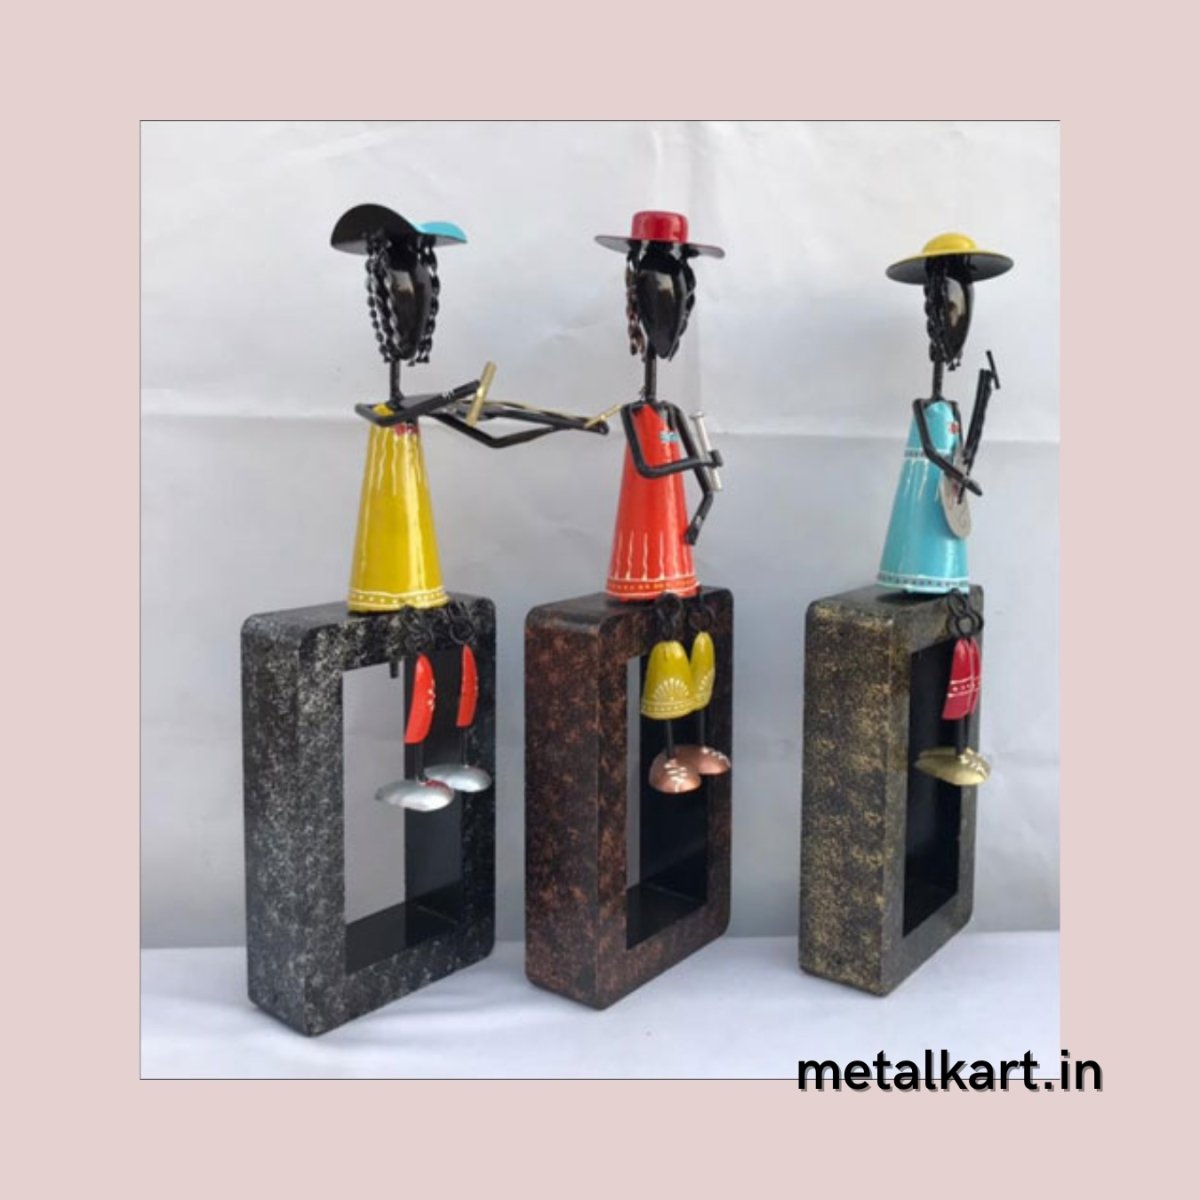 Metalkart Special Orchestra of 3 Colorful Musicians (15*03*13 Inches approx)